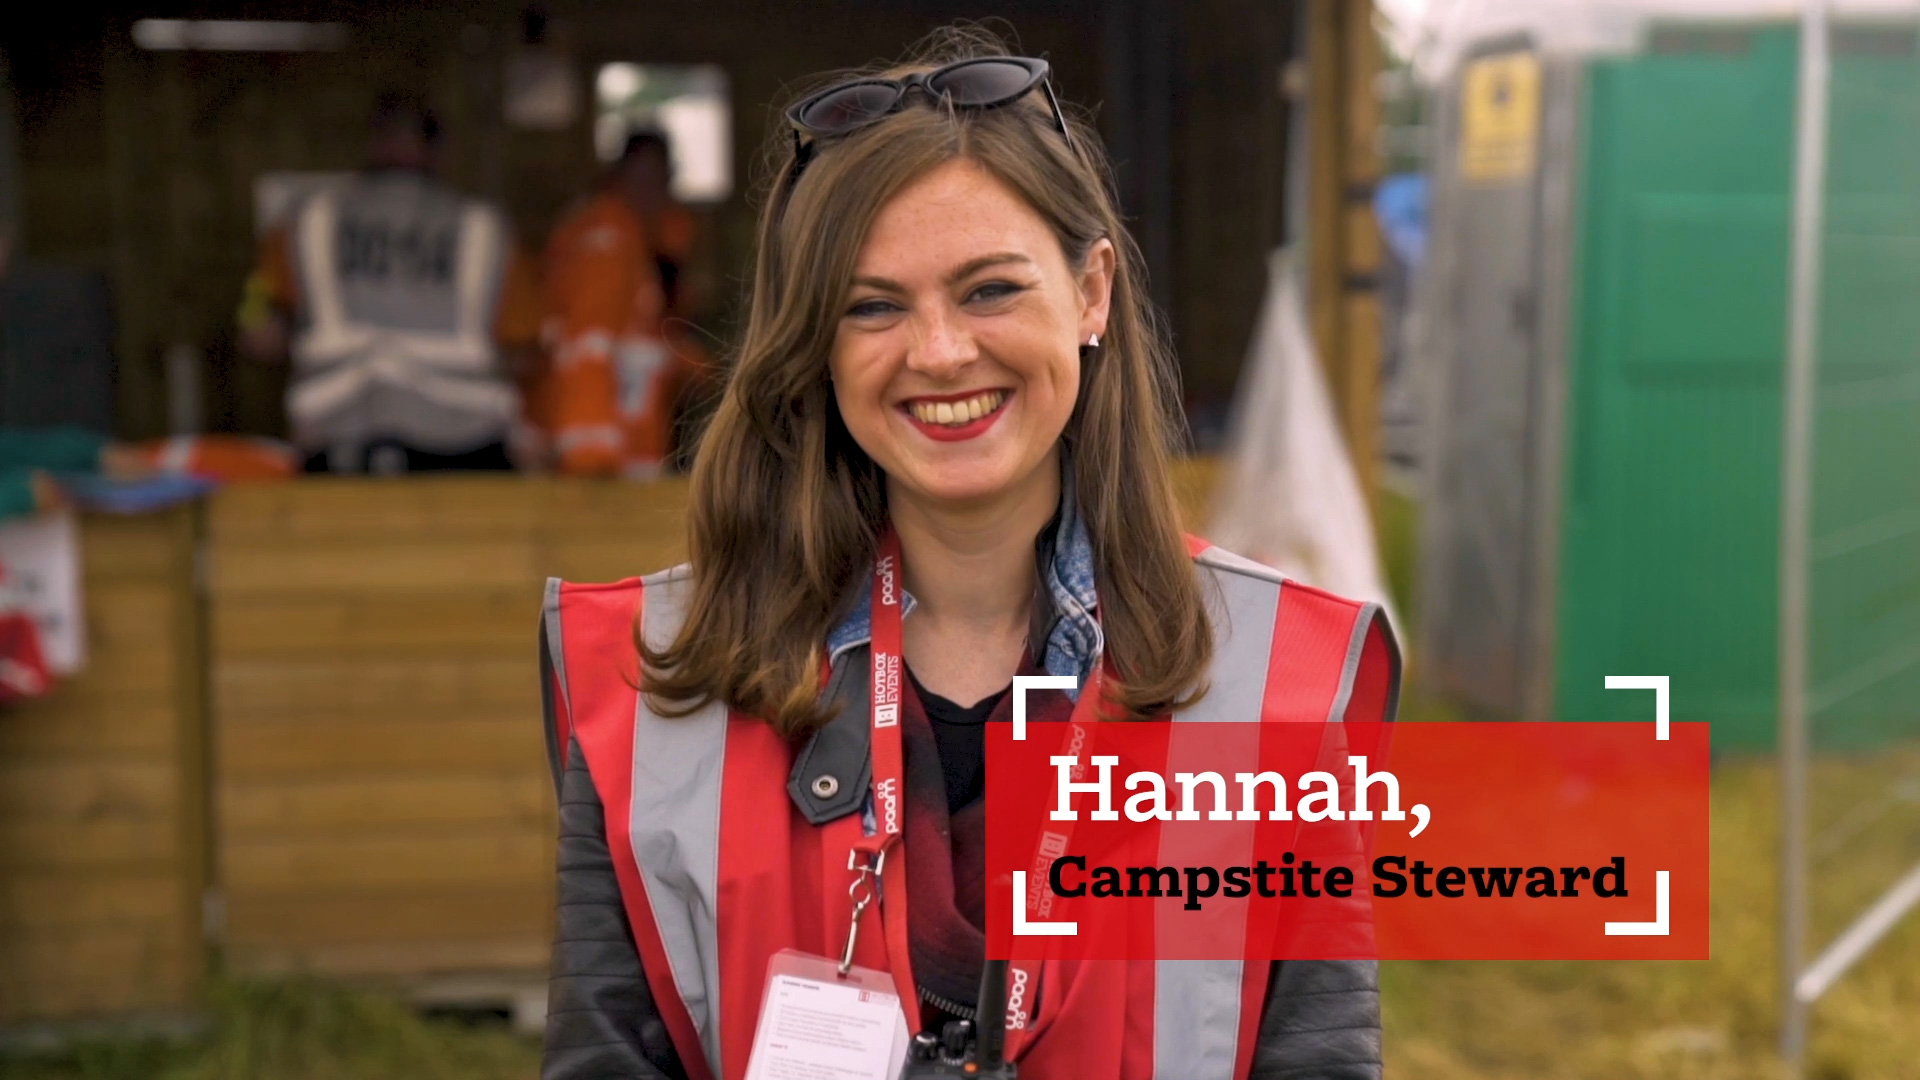 Hannah a Campsite Steward volunteering with Hotbox Events at Download Festival!